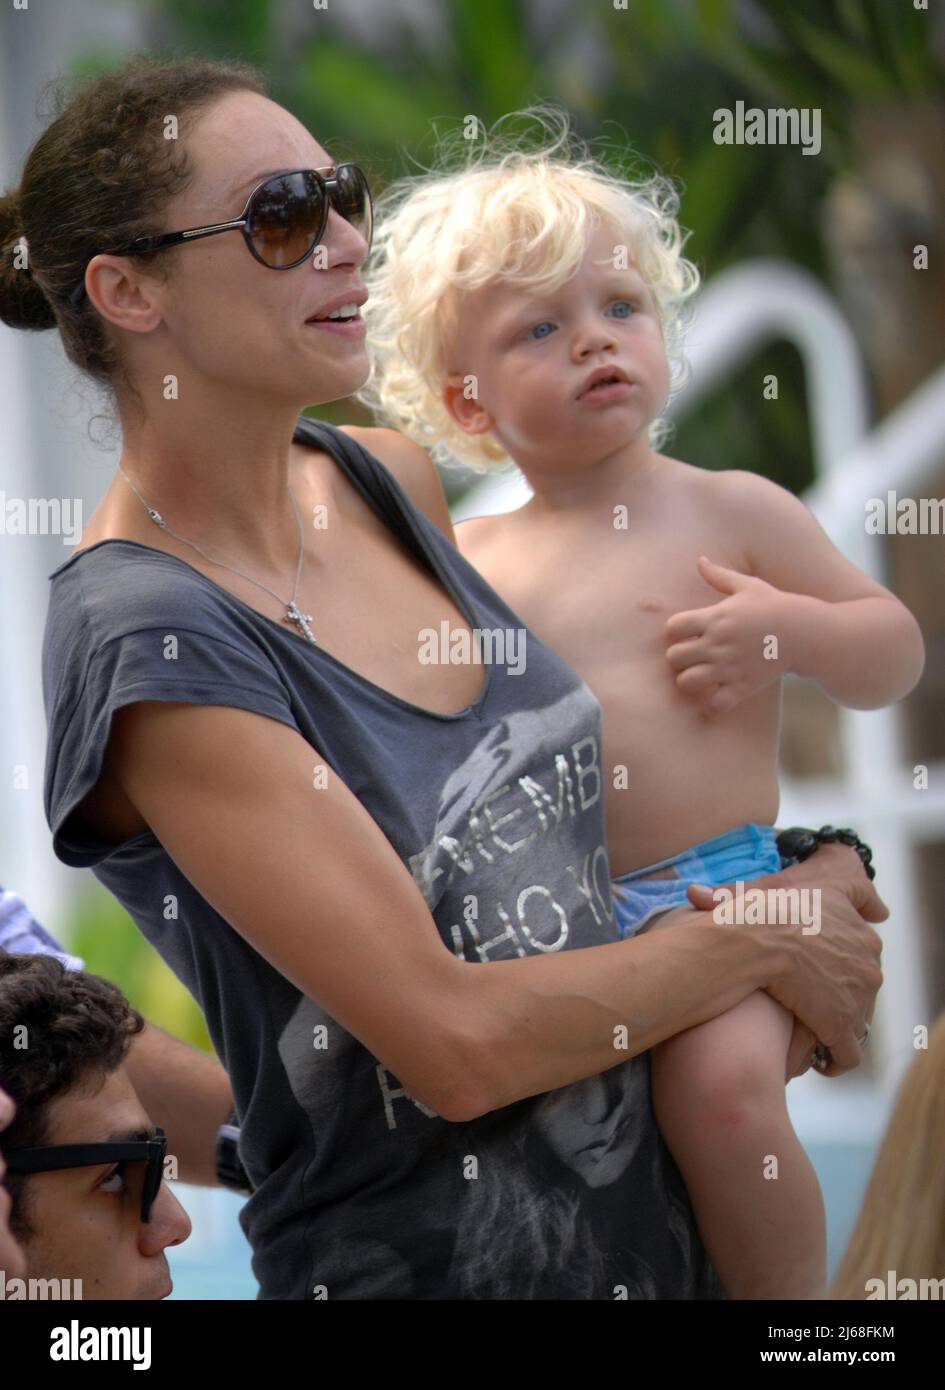 MIAMI BEACH, FL - SEPTEMBER 04: Tennis champ Boris Becker's and wife Sharlely Kerssenberg ('Lilly', model, m. Jun-2009, one son), spend some pool time with their sons Noah Gabriel (b. 18-Jan-1994), Elias Balthasar (b. 4-Sep-1999), and 1-year-old son Amadeus. Lilly and Boris were at the pool with Boris's X-wife Barbara Feltus (m. 17-Dec-1993, div. 15-Jan-2001, two sons) for one of her sonÕs birthday.  On September 4, 2011 in Miami, Florida.   People:  Sharlely Kerssenberg Amadeus Becker Stock Photo